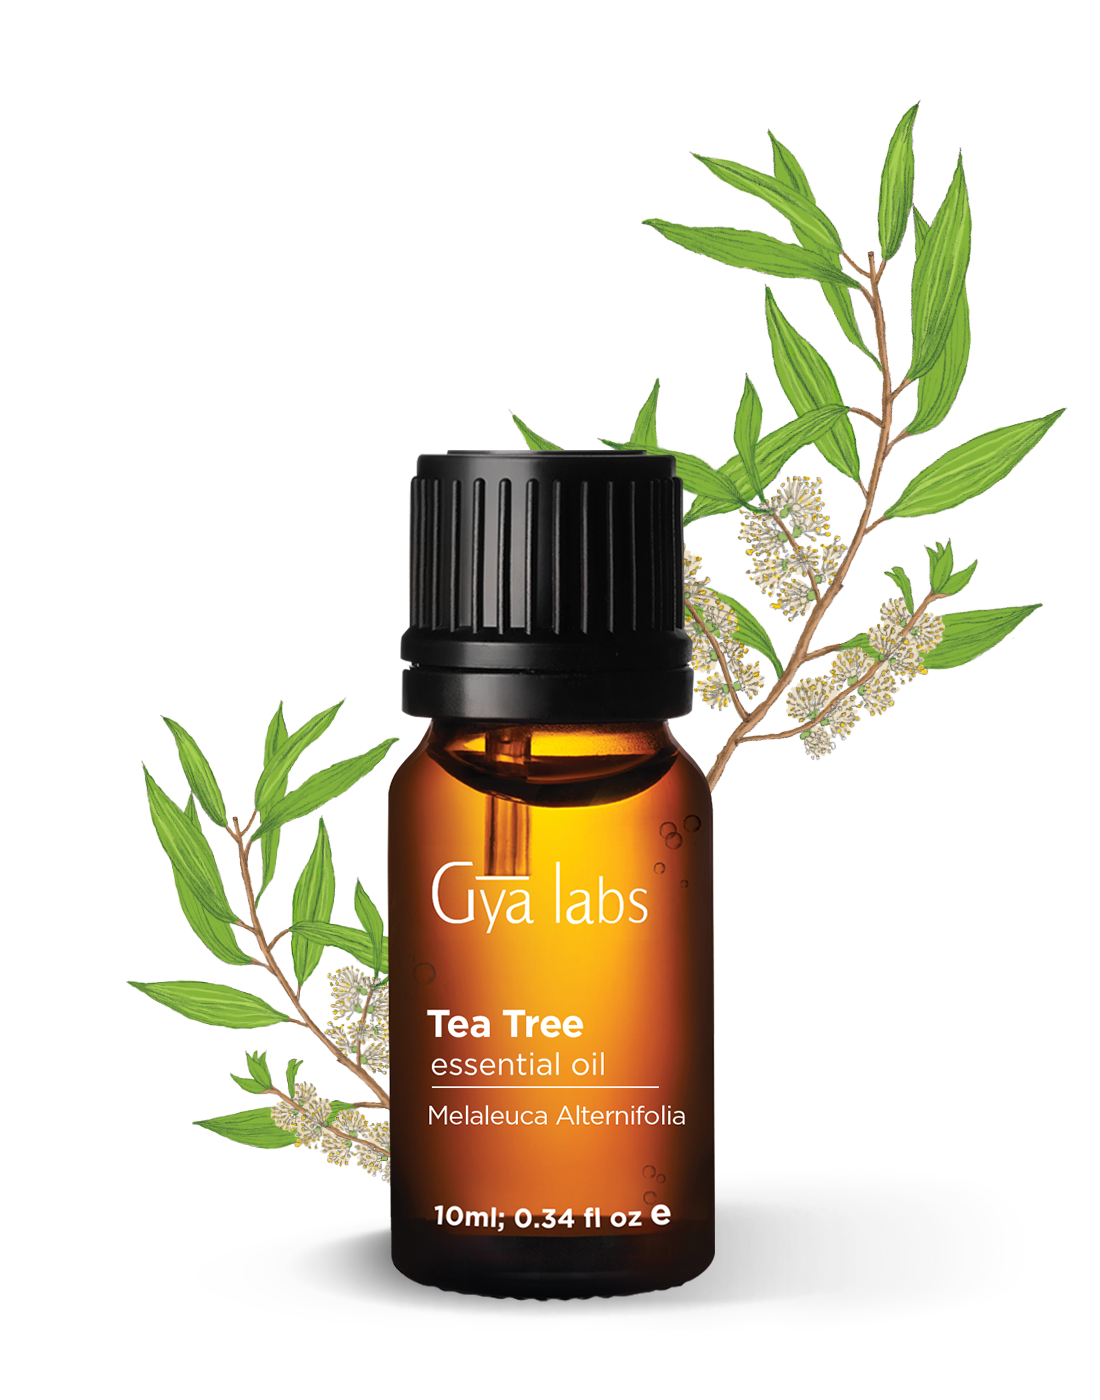 Benefits & Uses of Tea Tree Oil for Skin, Hair & Aromatherapy